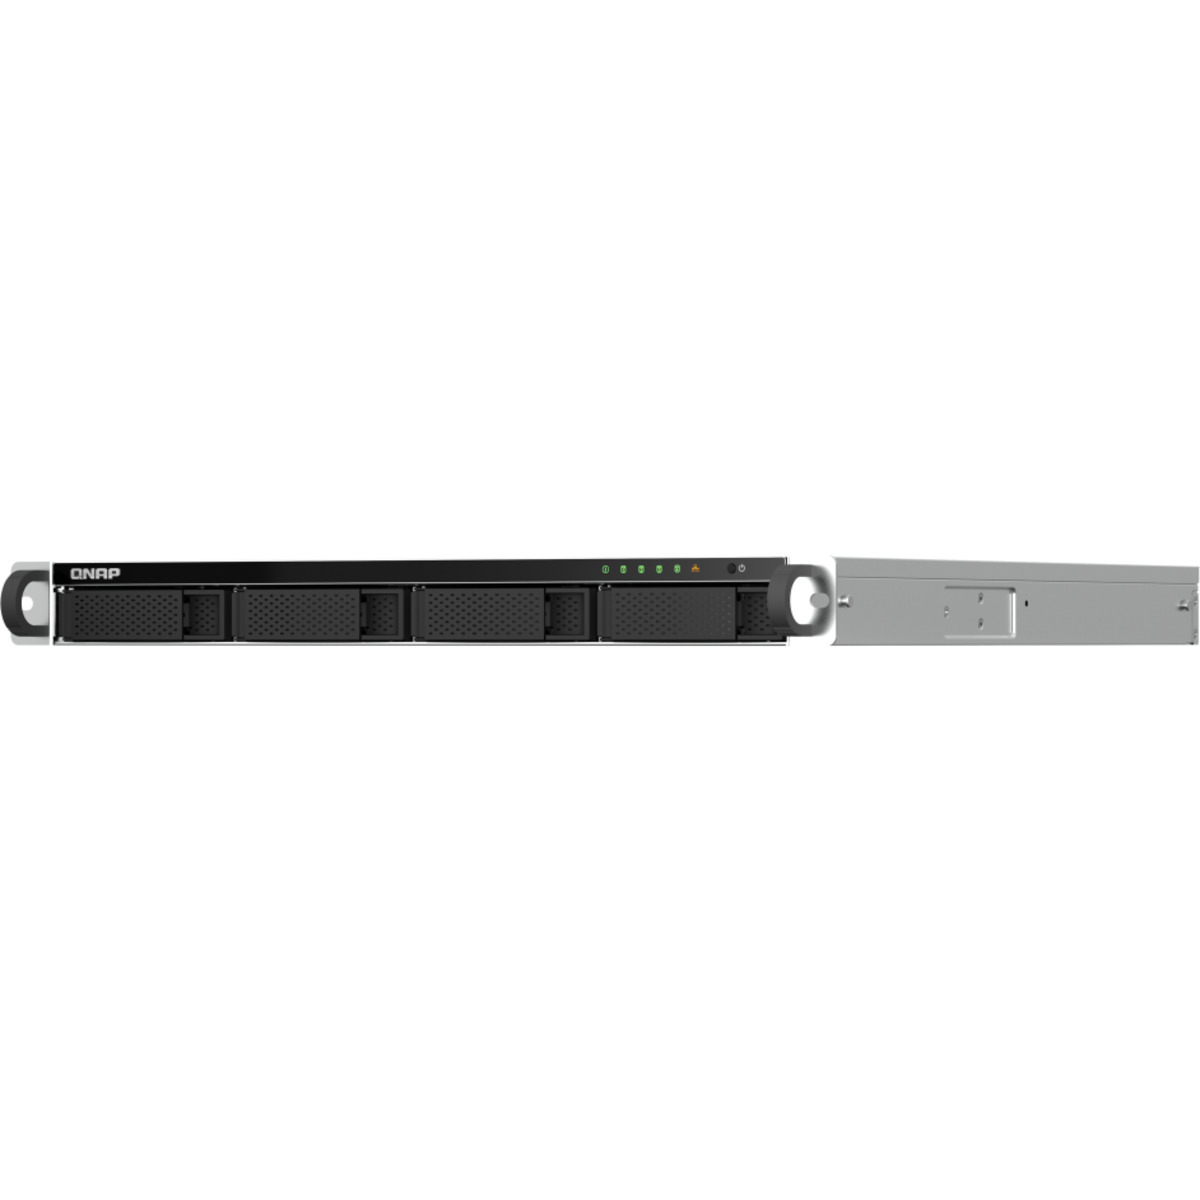 QNAP TS-464U 12tb 4-Bay RackMount Multimedia / Power User / Business NAS - Network Attached Storage Device 2x6tb Seagate EXOS 7E10 ST6000NM019B 3.5 7200rpm SATA 6Gb/s HDD ENTERPRISE Class Drives Installed - Burn-In Tested TS-464U